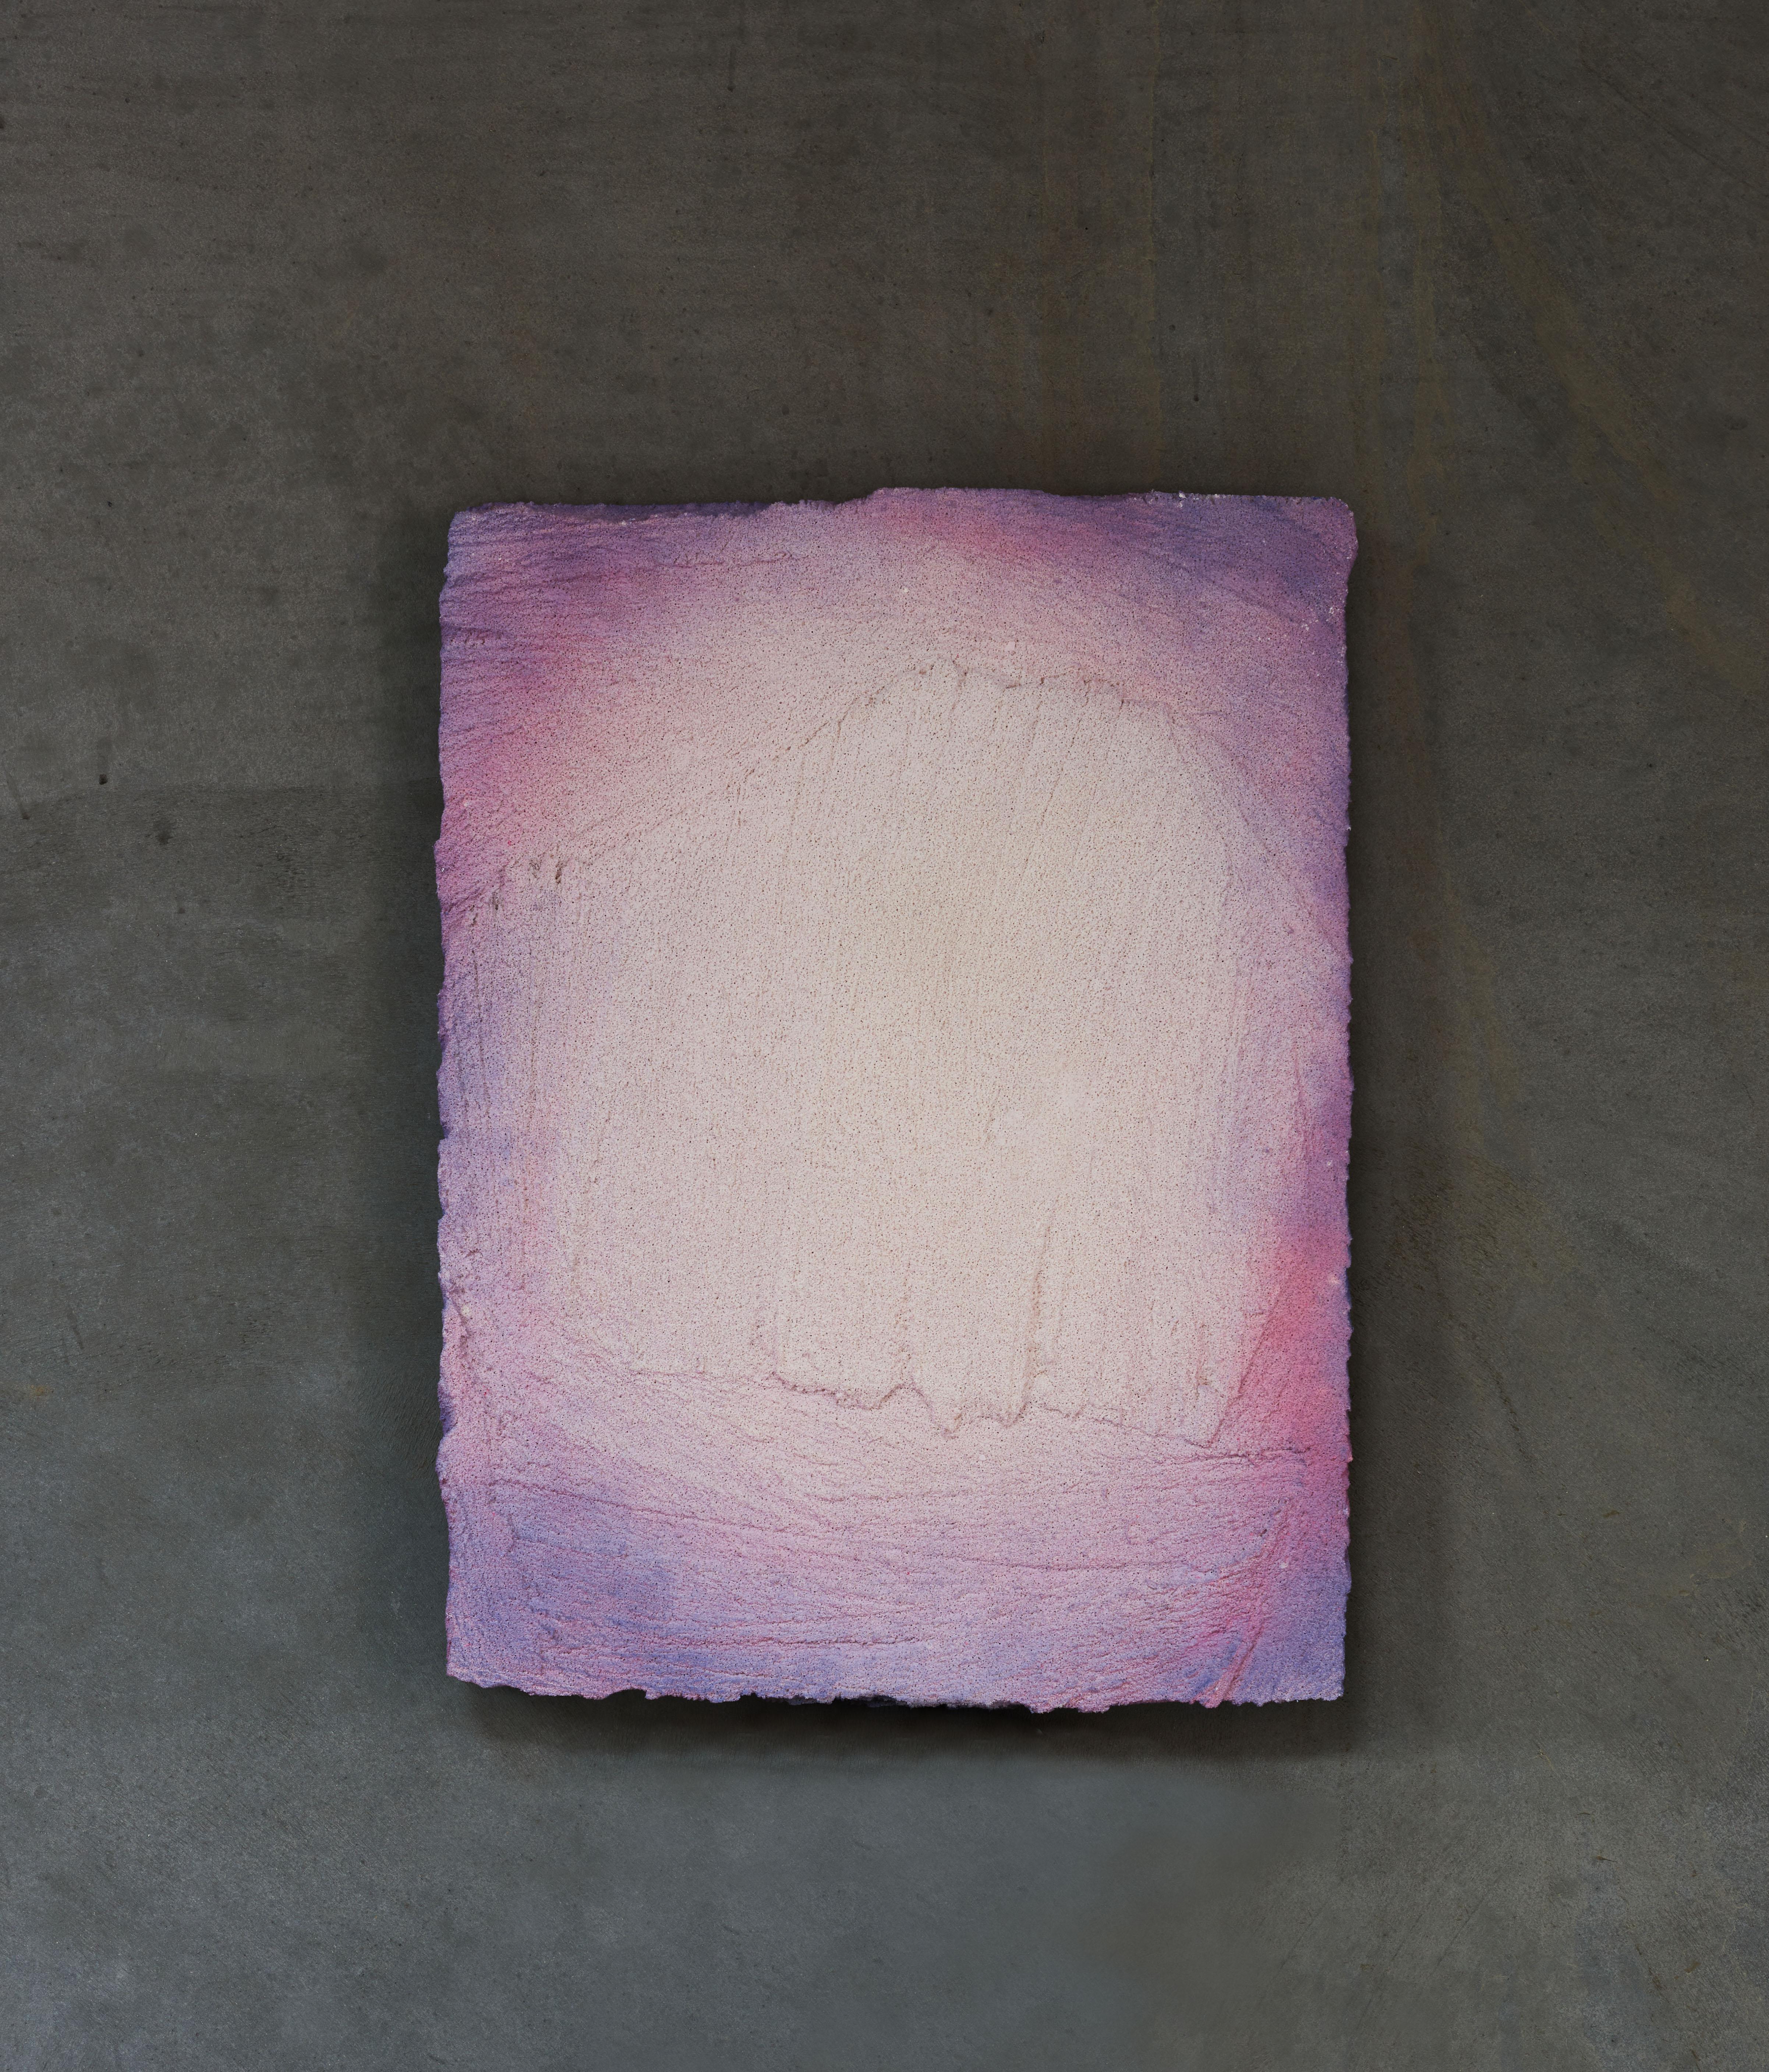 Crystall wall piece by Andredottir & Bobek
Dimensions: W 320 x H 450 cm
Materials: Reused Foam/mattress and Jesmontite Hardner in Color Purple/Pink Fade

Artificial Nature is a collaboration between the artist and design duo Josephine